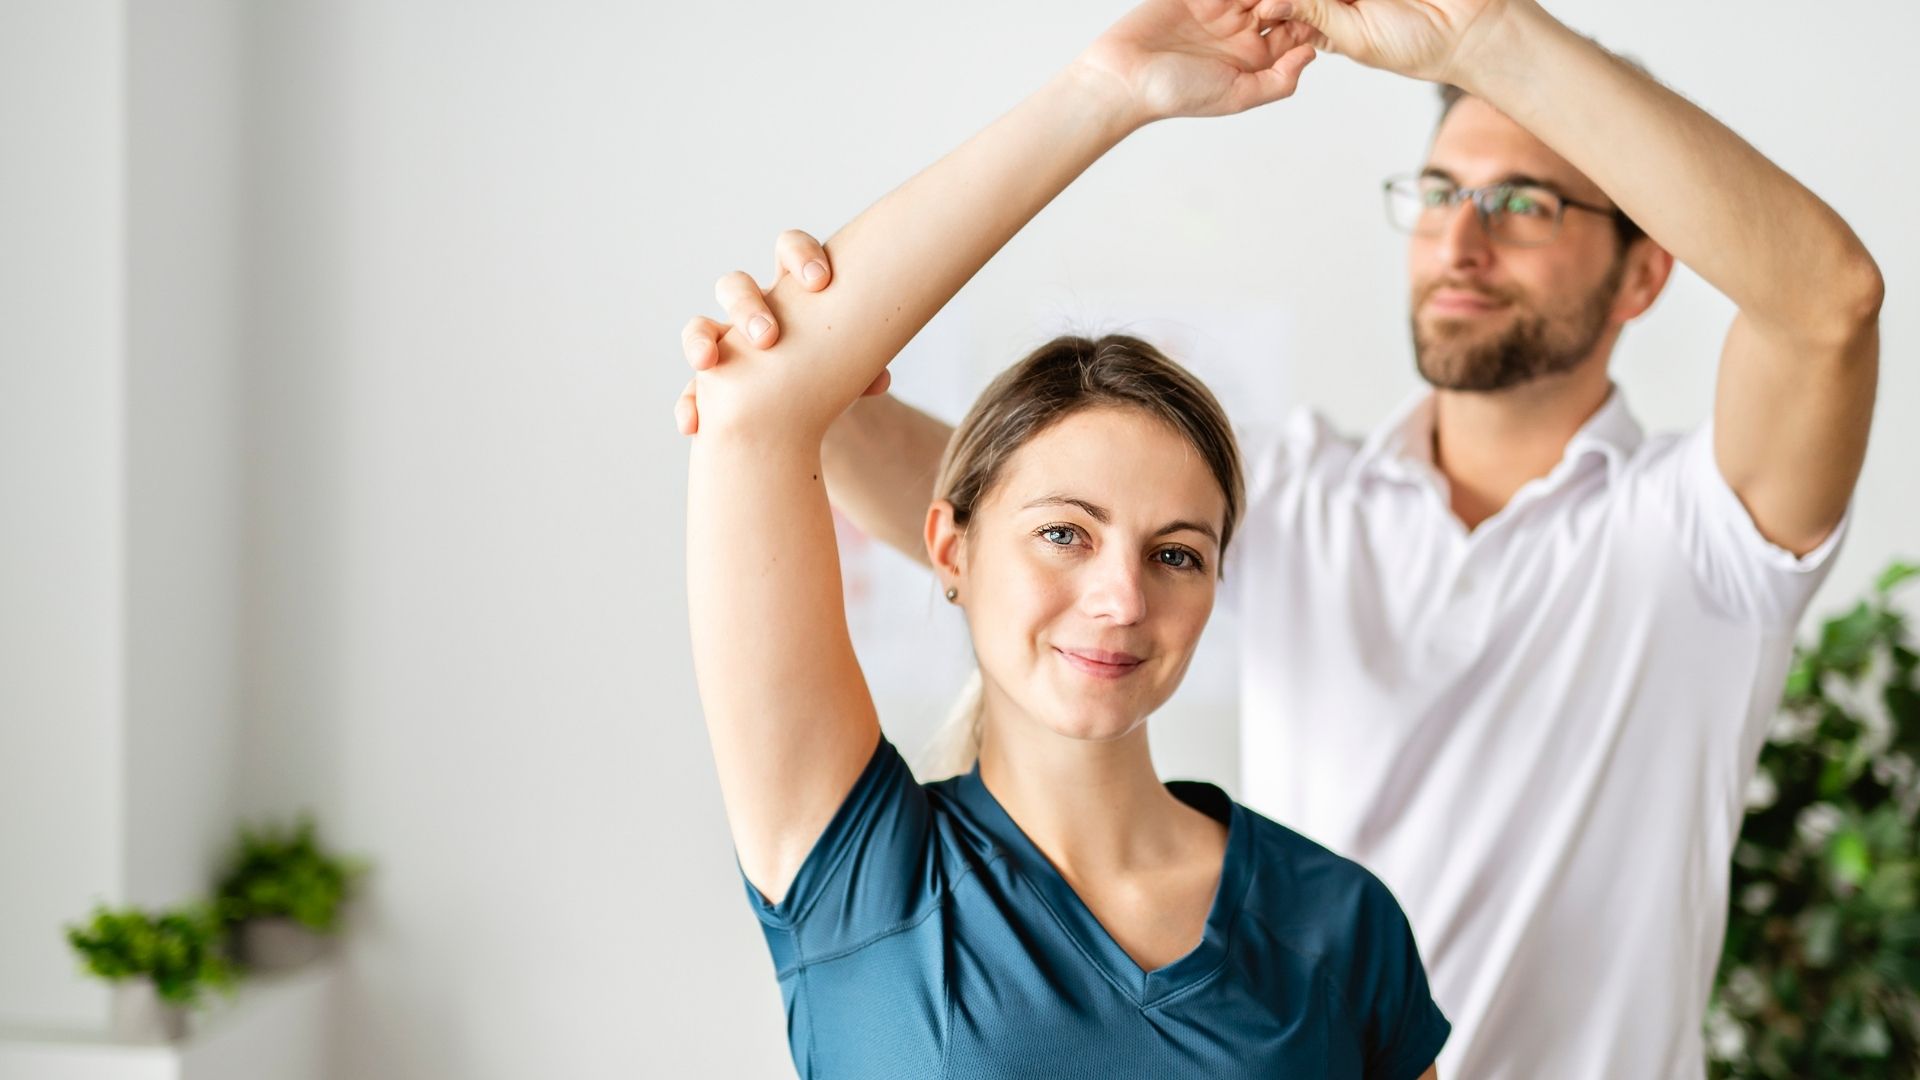 Physical Therapy: An Essential Facts You Should Know